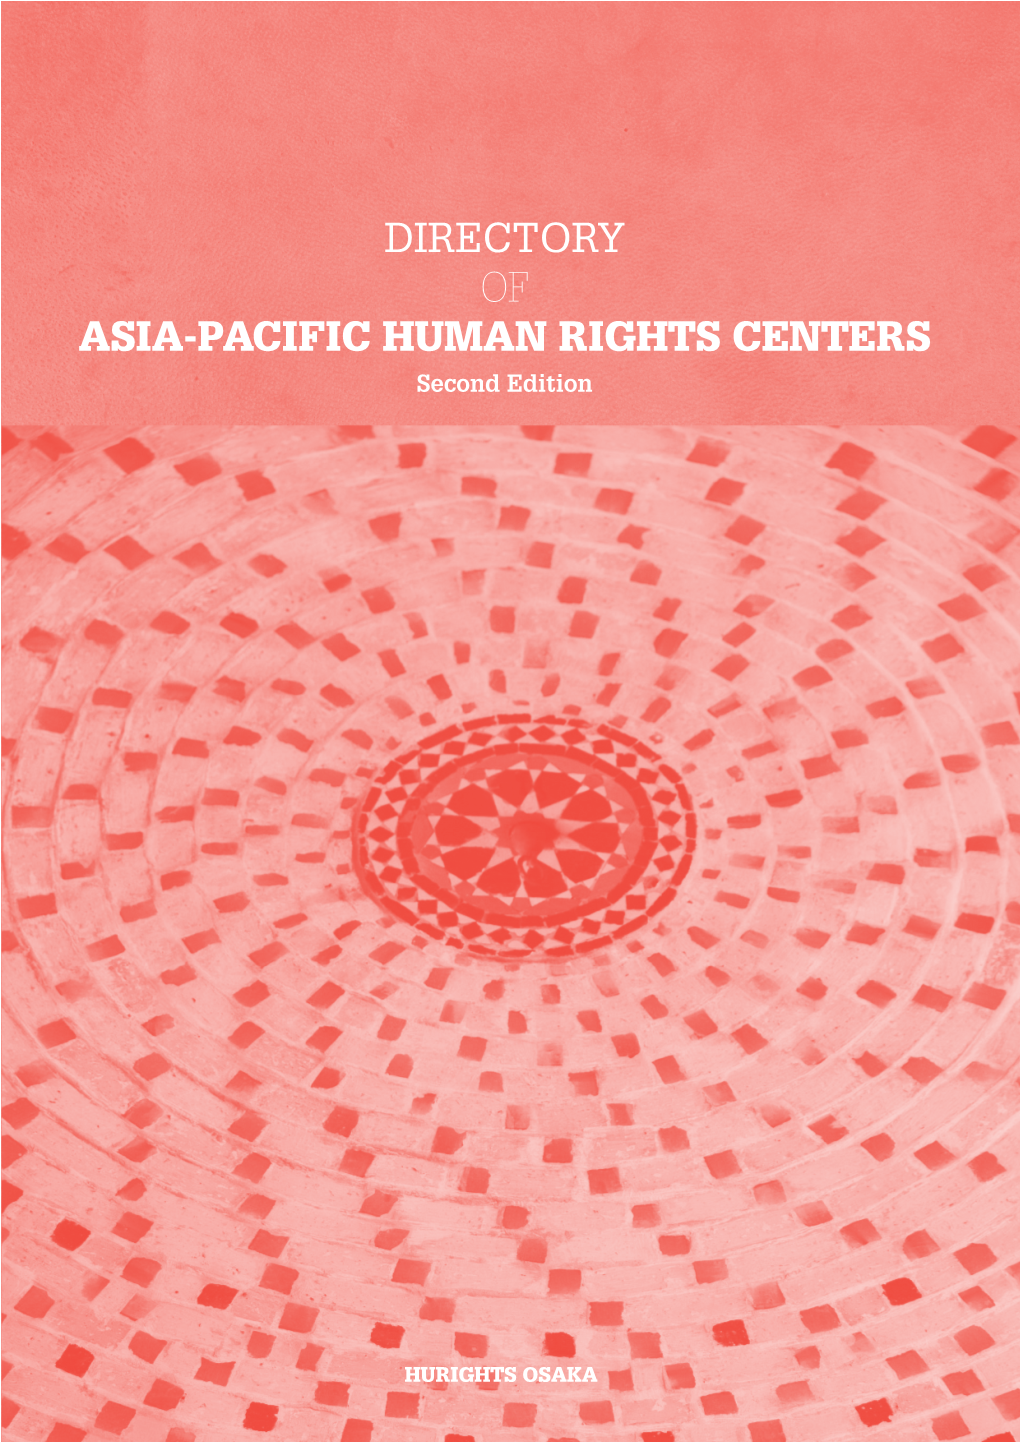 DIRECTORY of ASIA-PACIFIC HUMAN RIGHTS CENTERS Second Edition